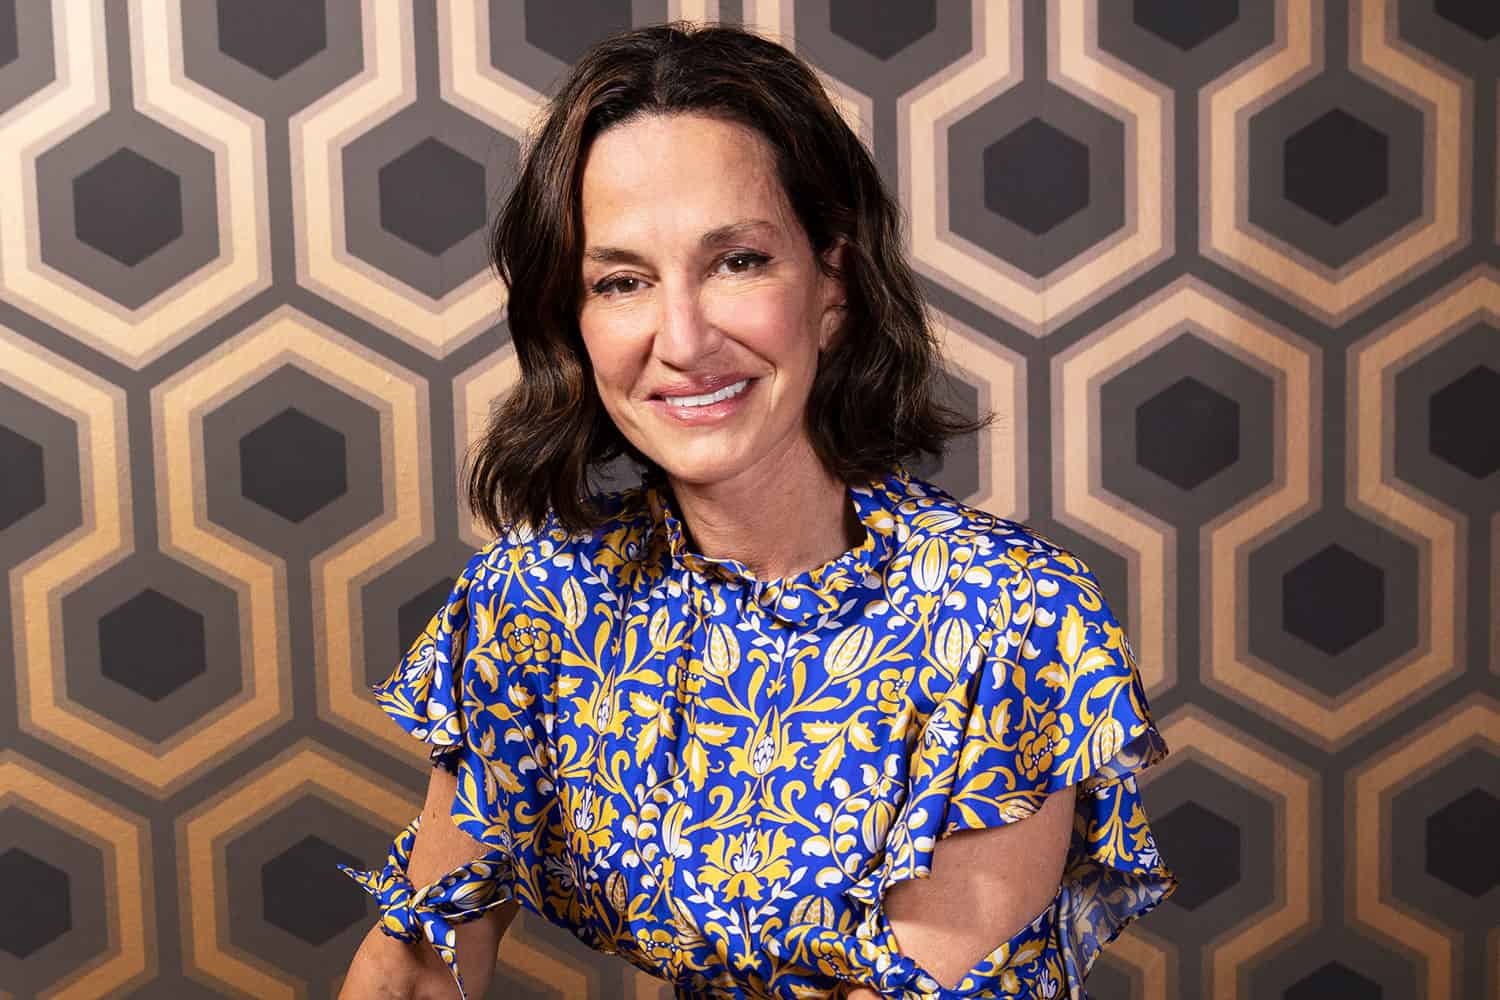 12 Astonishing Facts About Cynthia Rowley - Facts.net